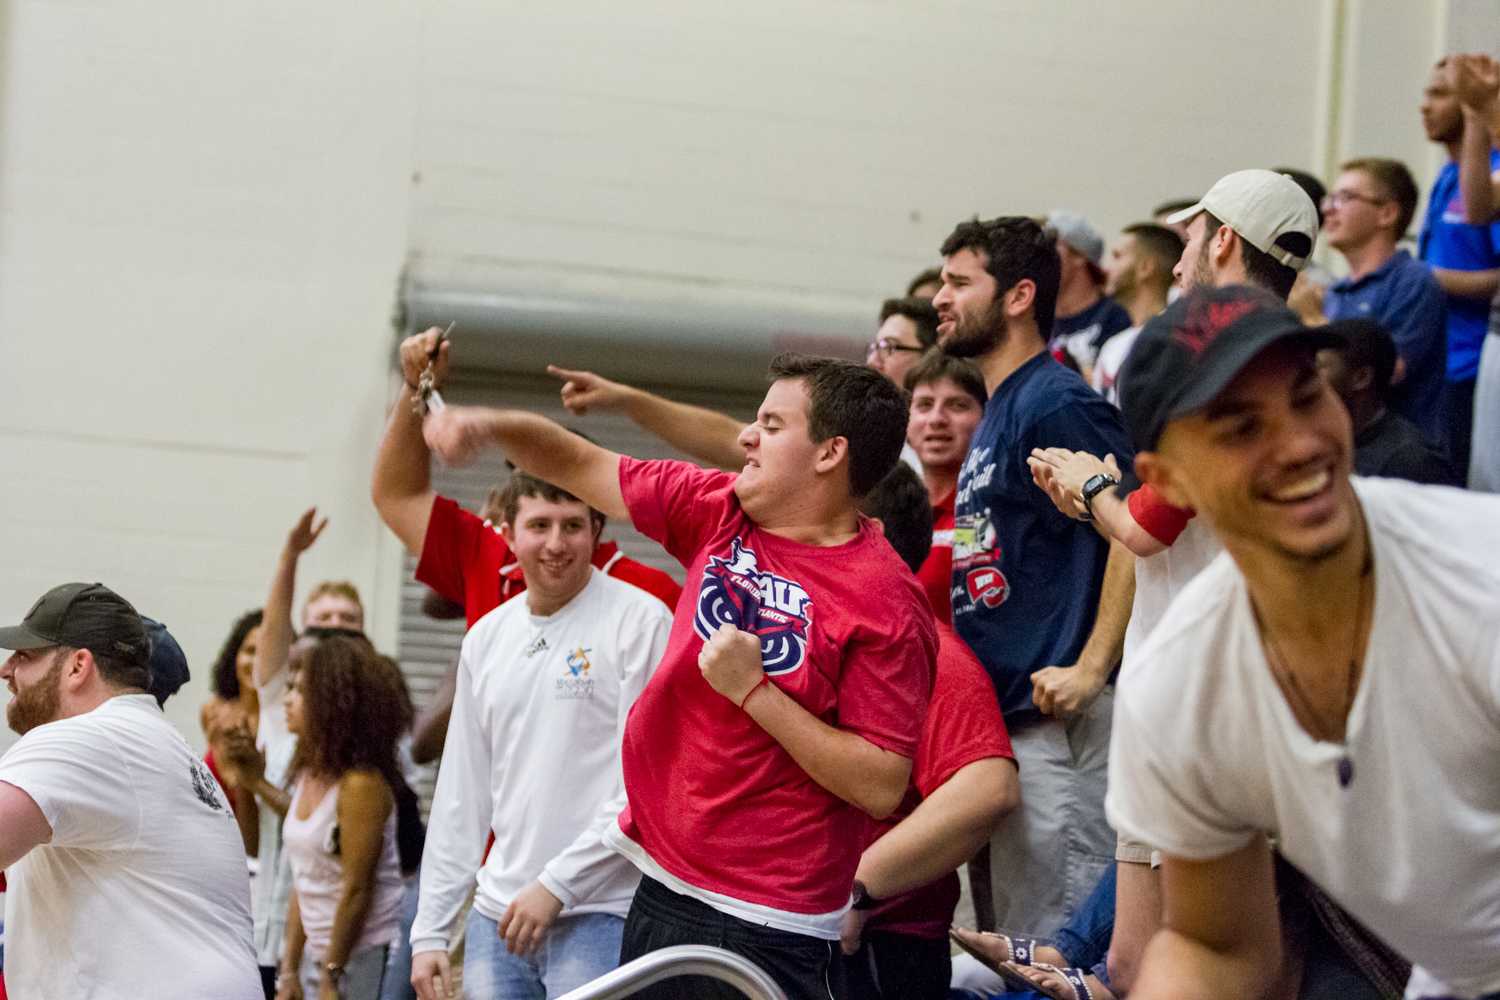 The crowd at the Burrow celebrated with few seconds left in the game as FAU won over Marshall 76-62.